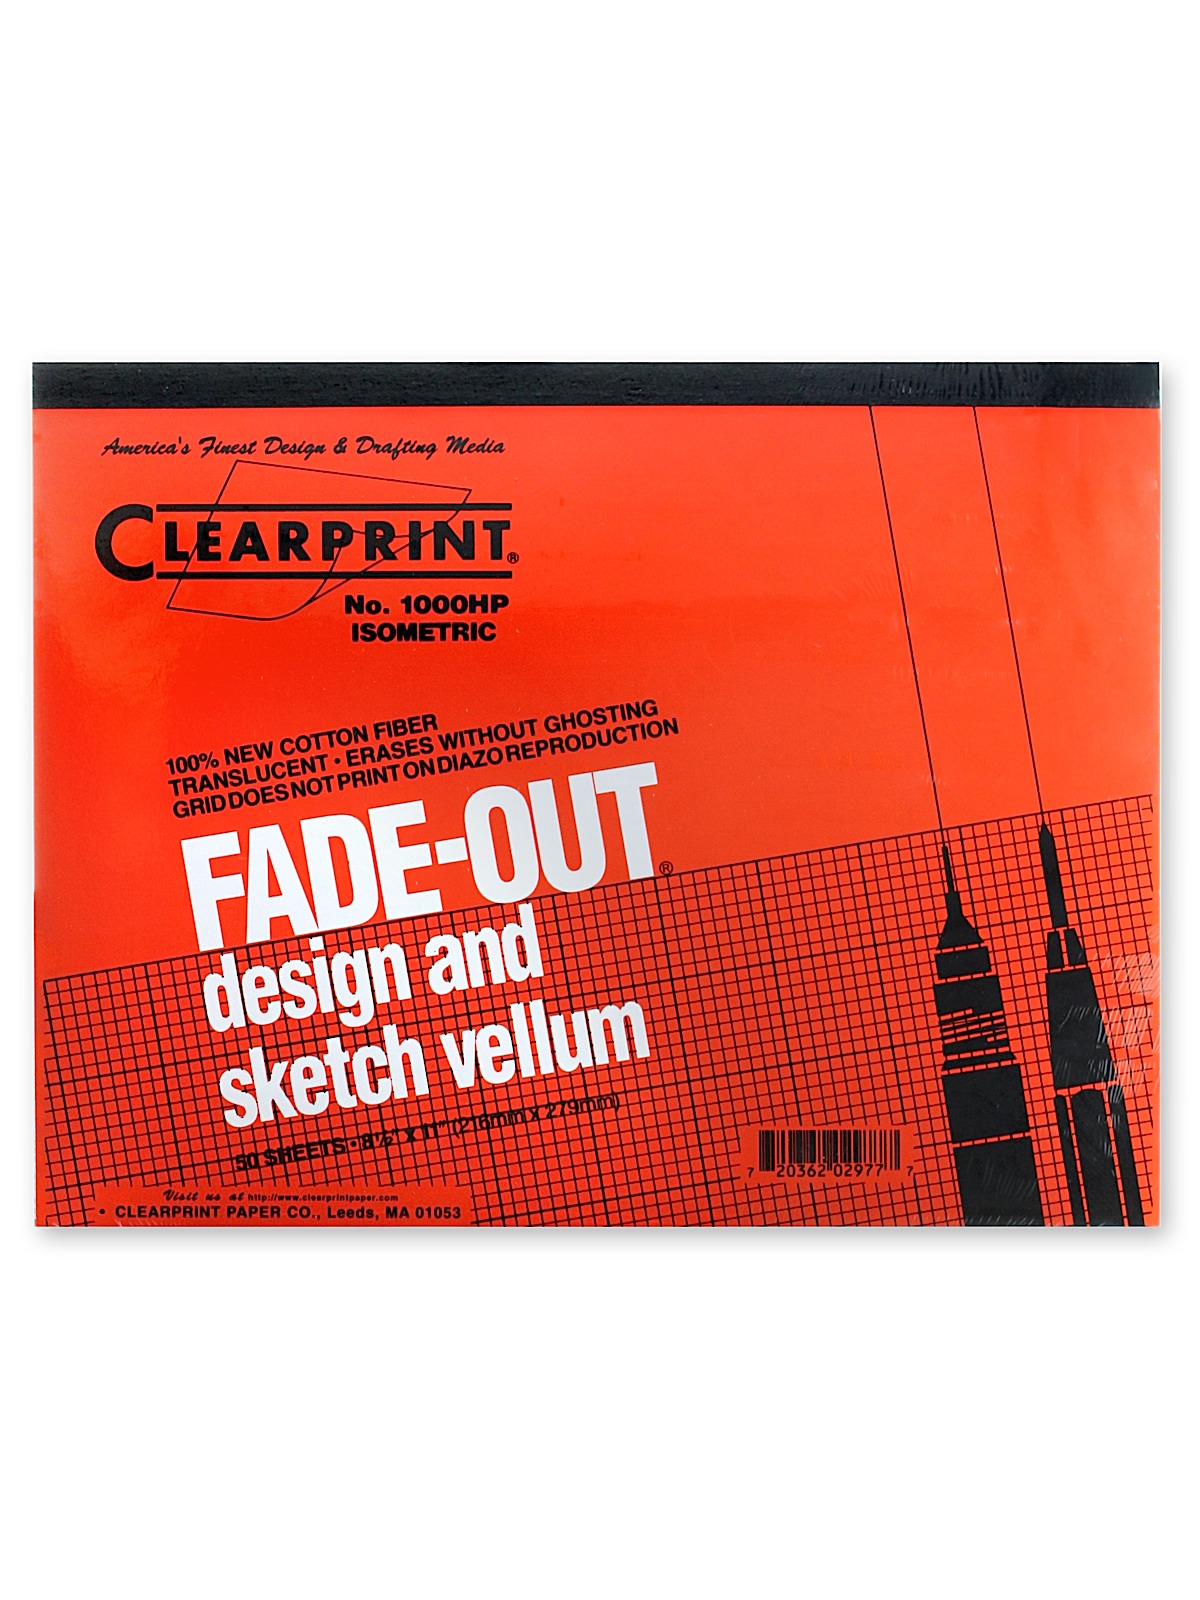 Fade-out Design And Sketch Vellum - Grid Pad 10 X 10 17 In. X 22 In. Pad Of 50